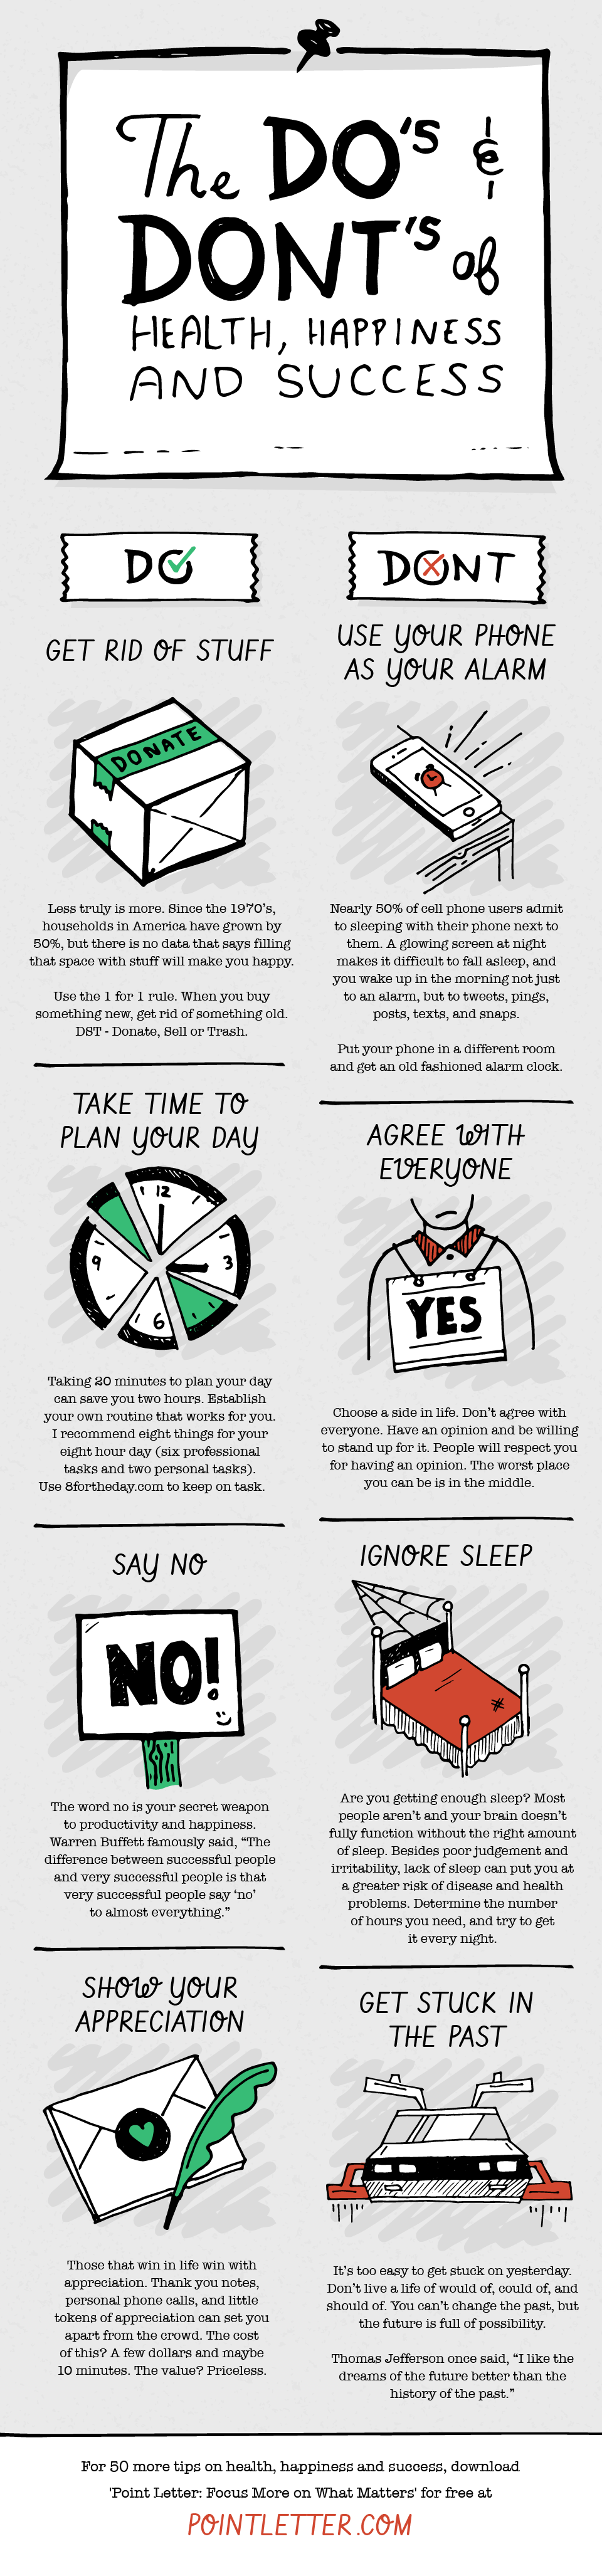 8 Do’s and Don’ts of Health, Happiness and Success (Infographic)